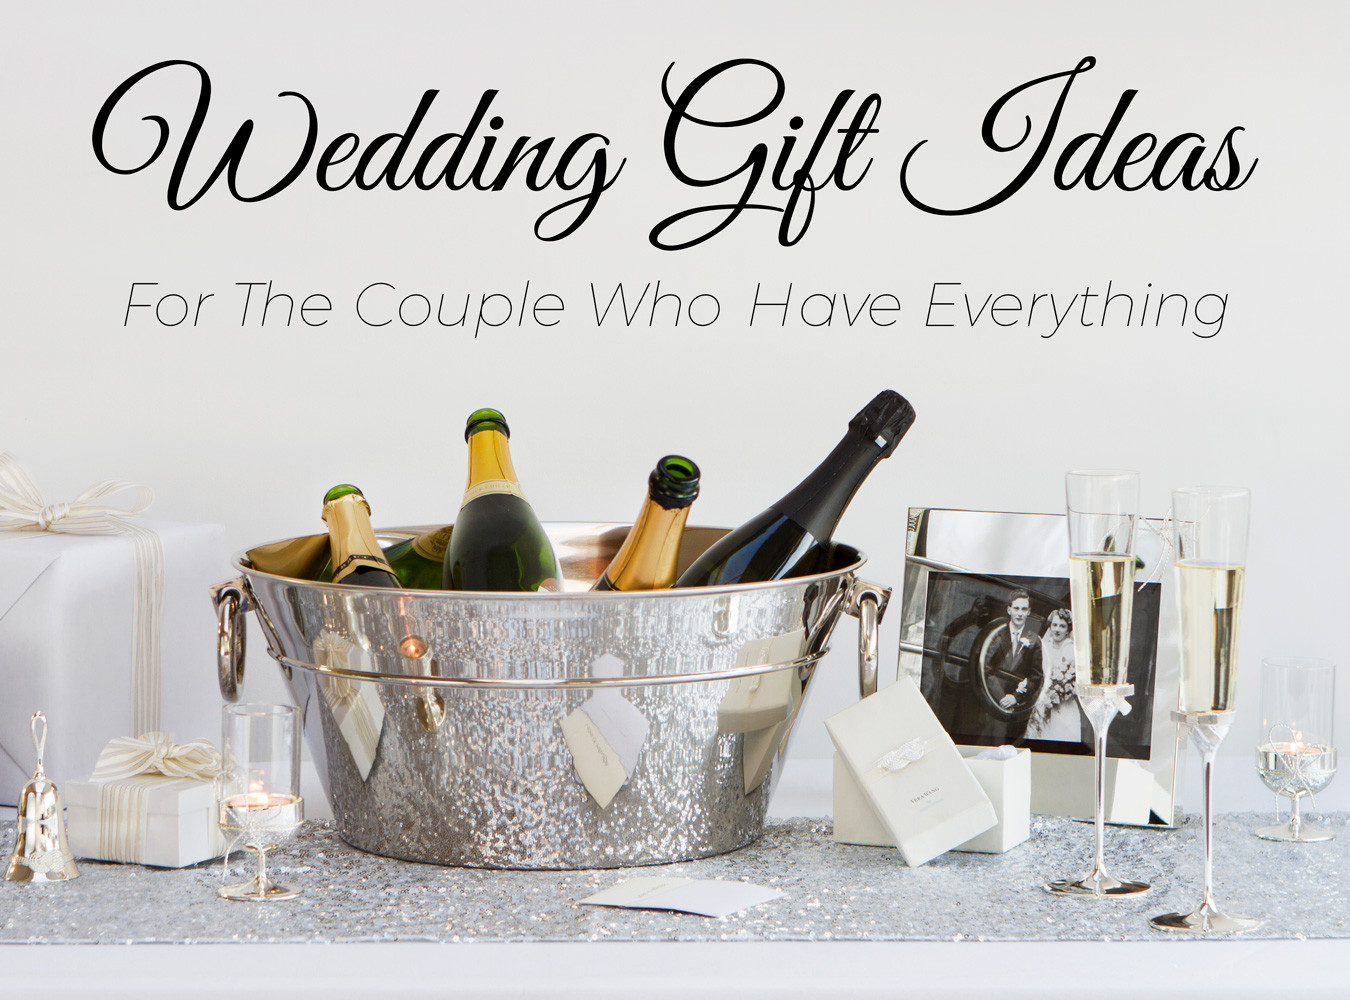 Gift Ideas For Couples
 5 Wedding Gift Ideas for the Couple Who Have Everything